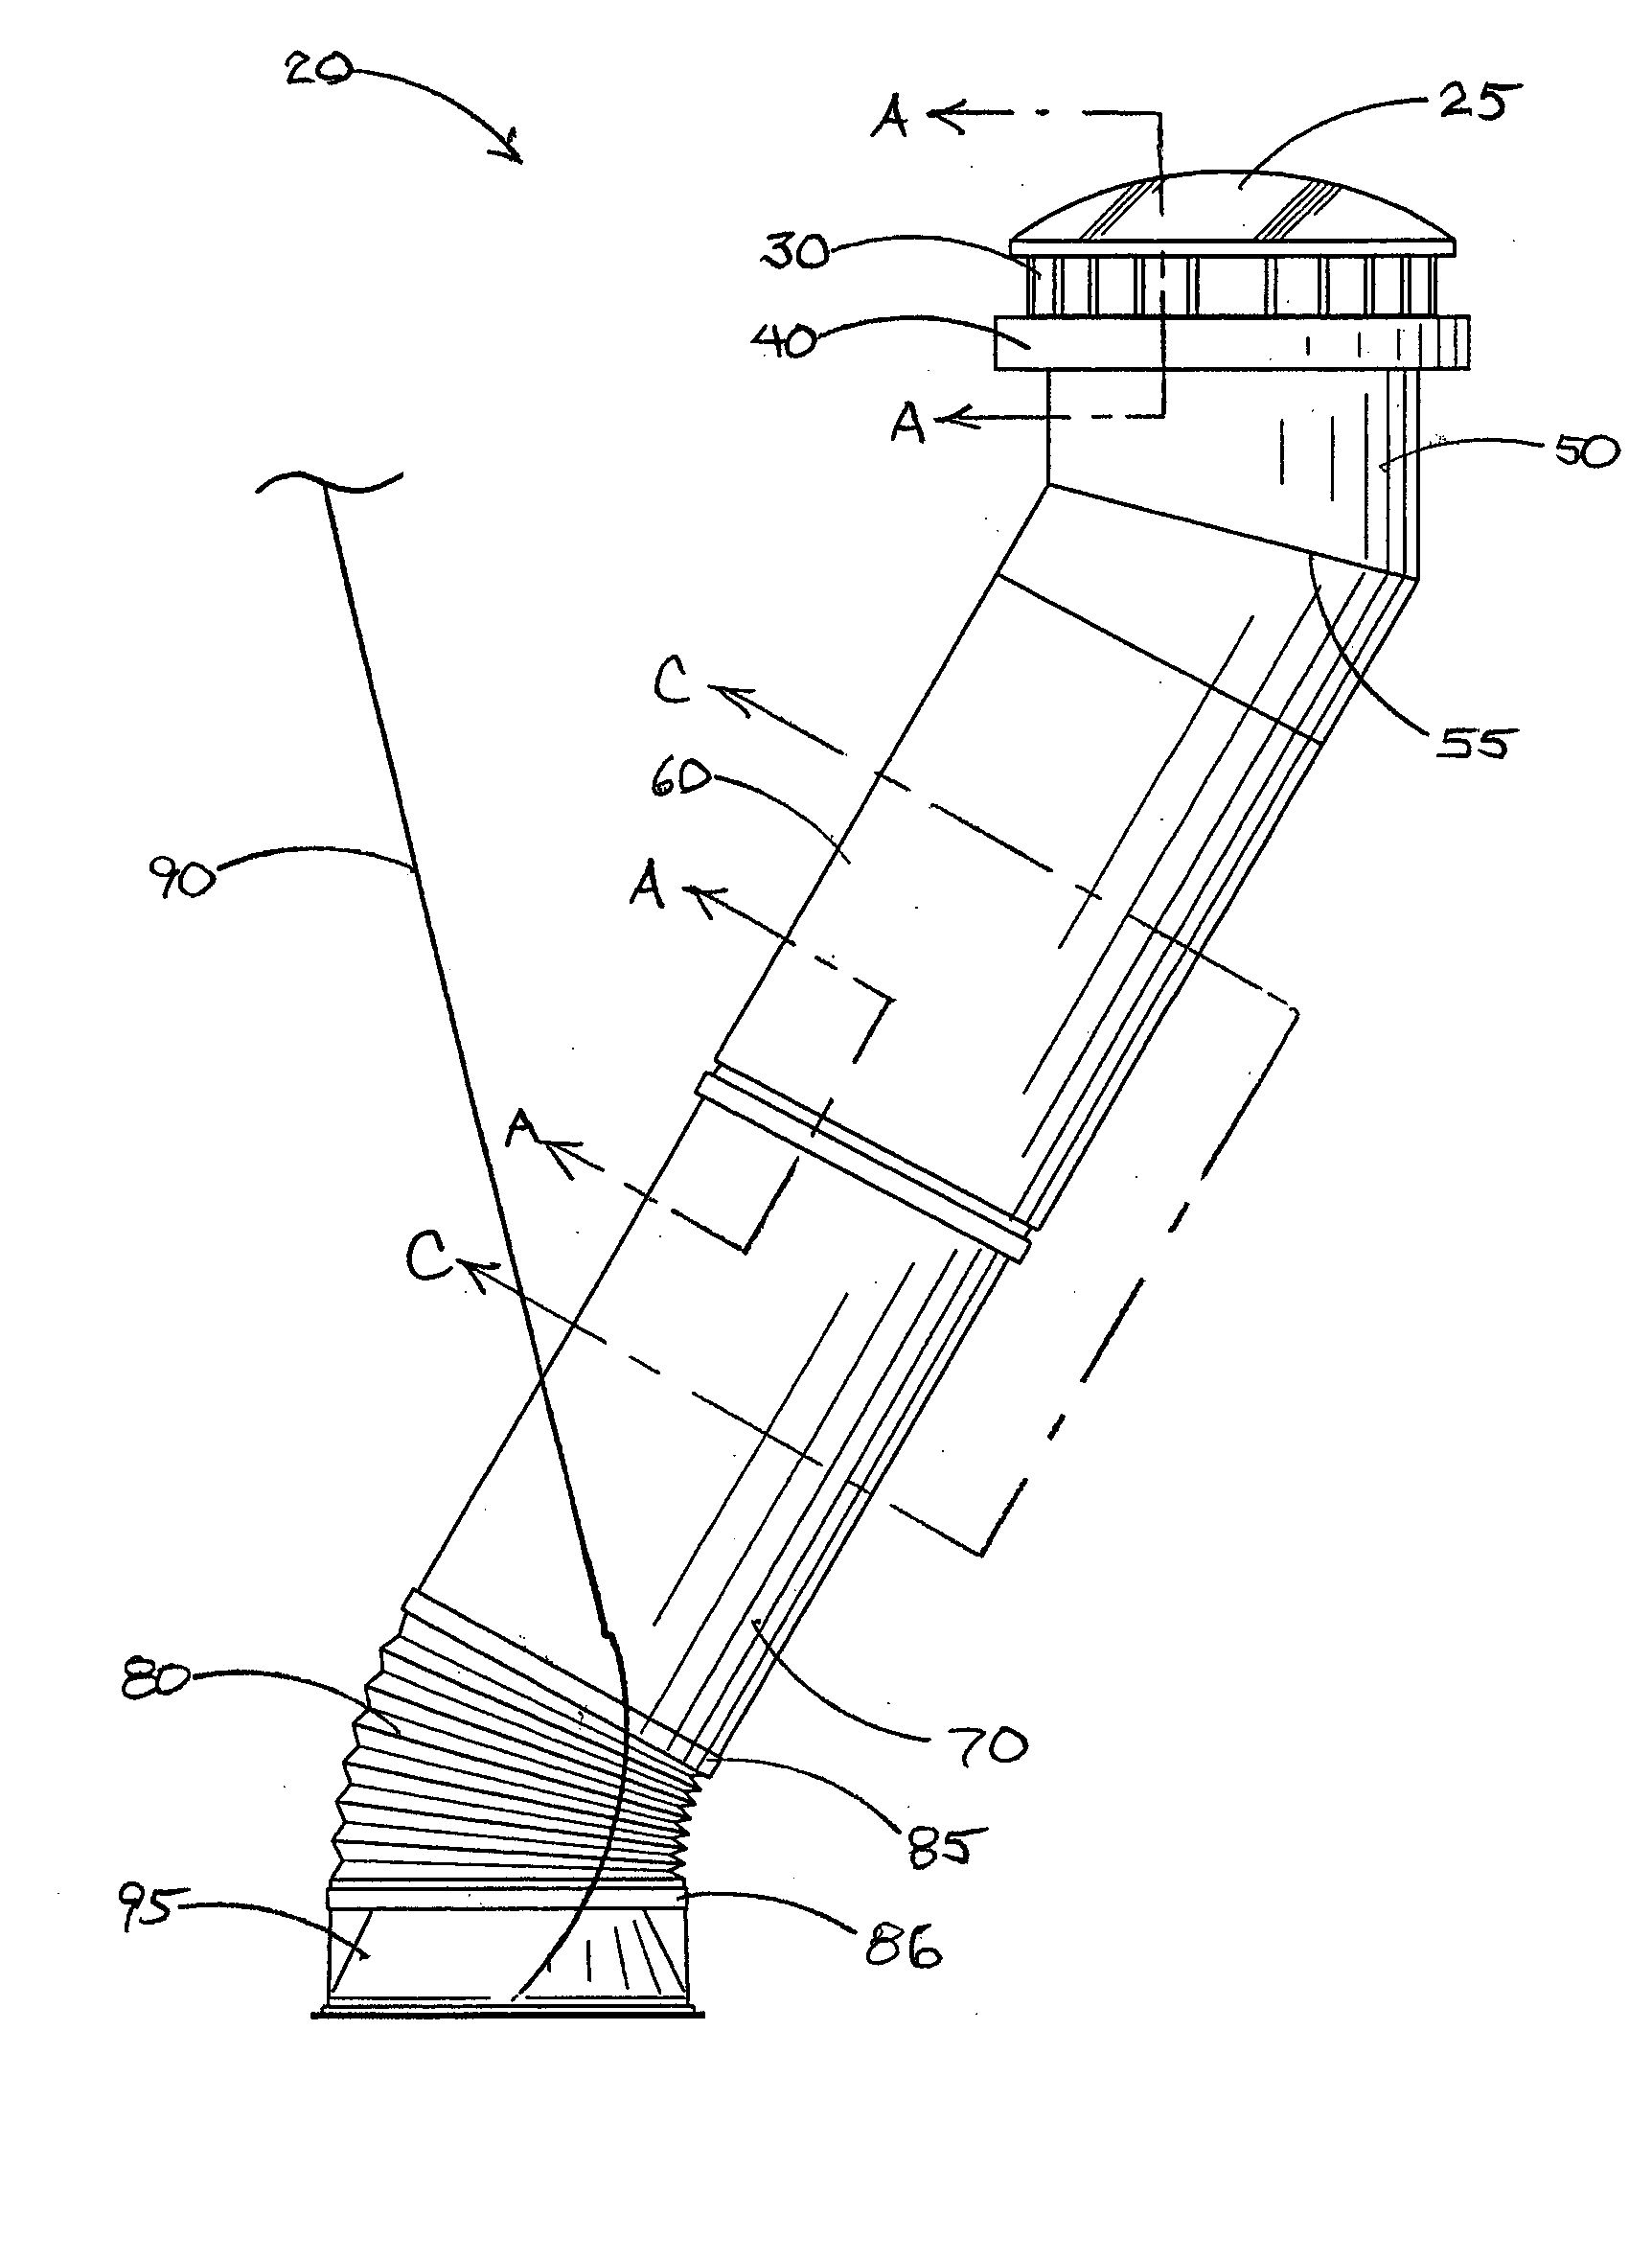 Skylight with displacement absorber and interlocking telescoping tubes